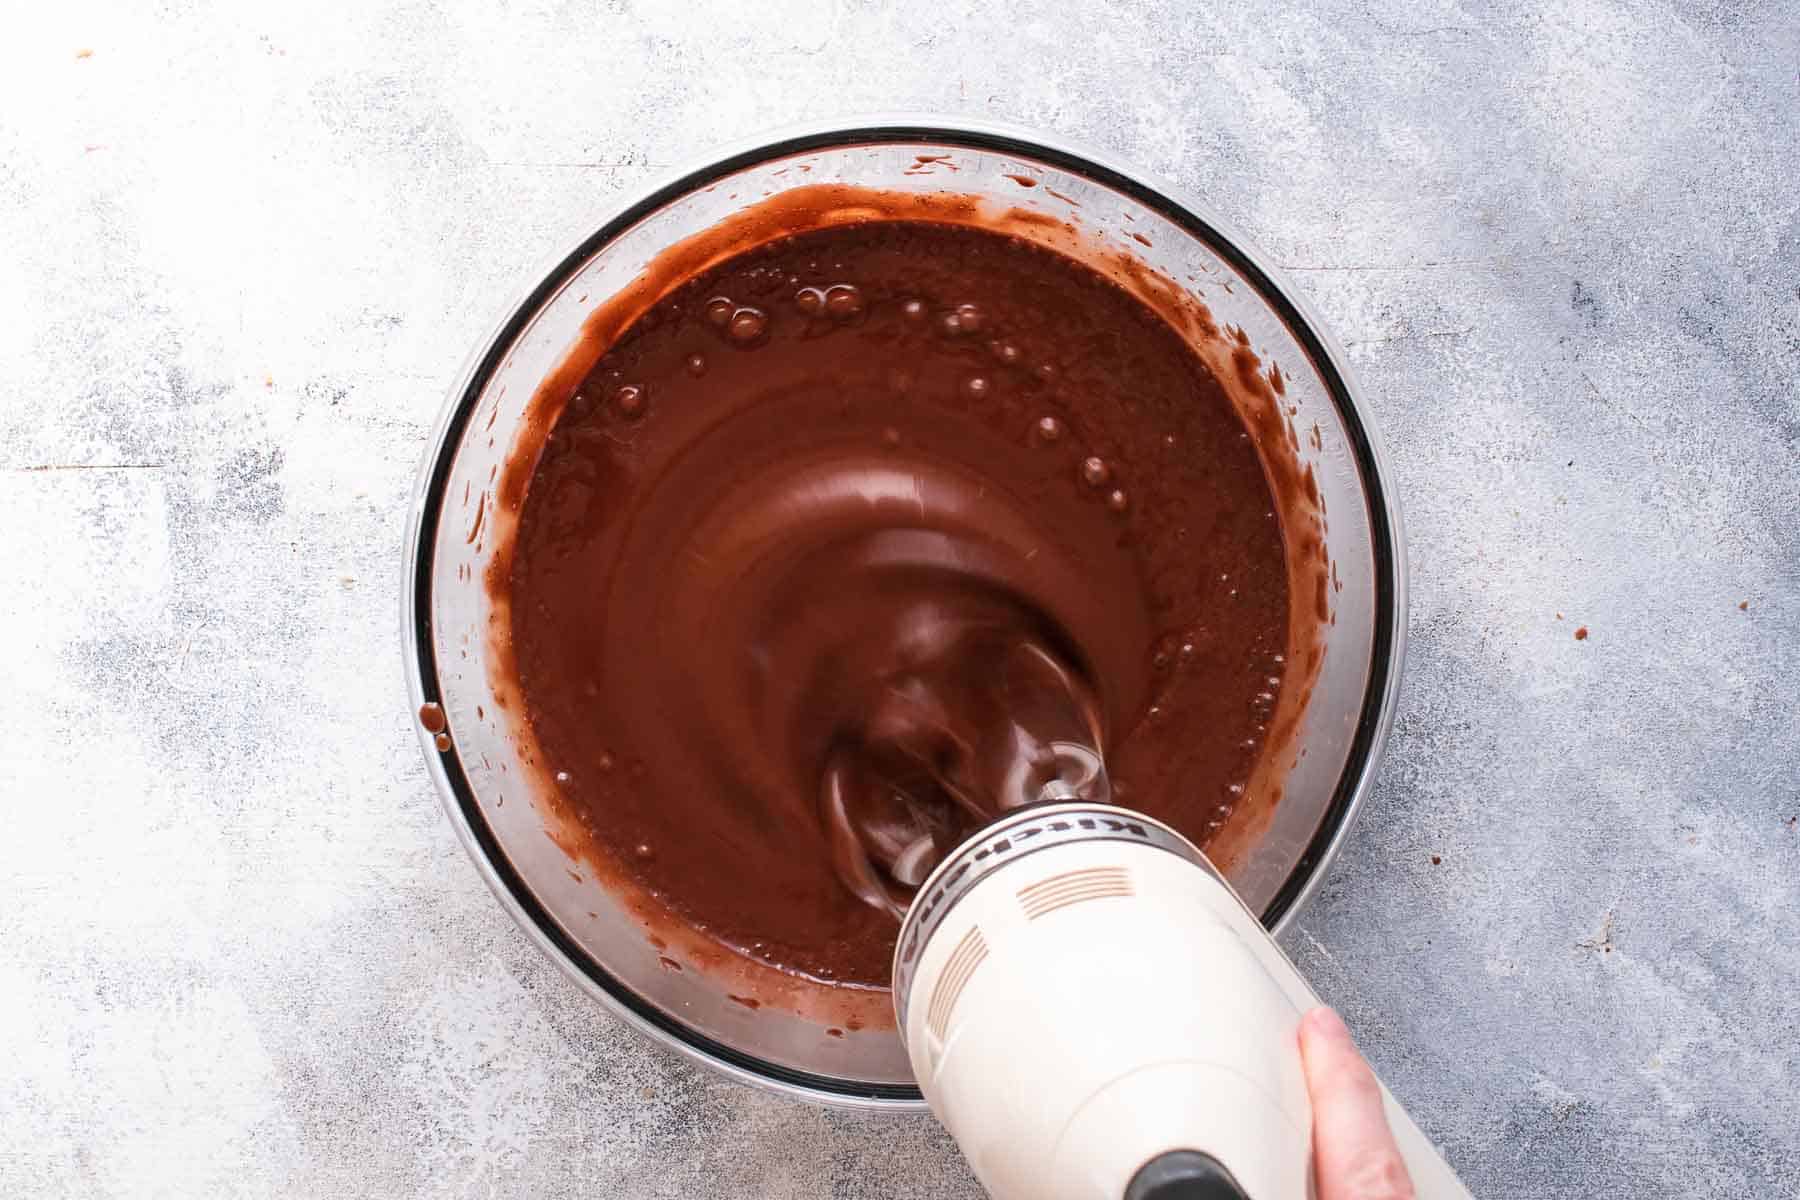 mixing water into chocolate cake batter with mixer